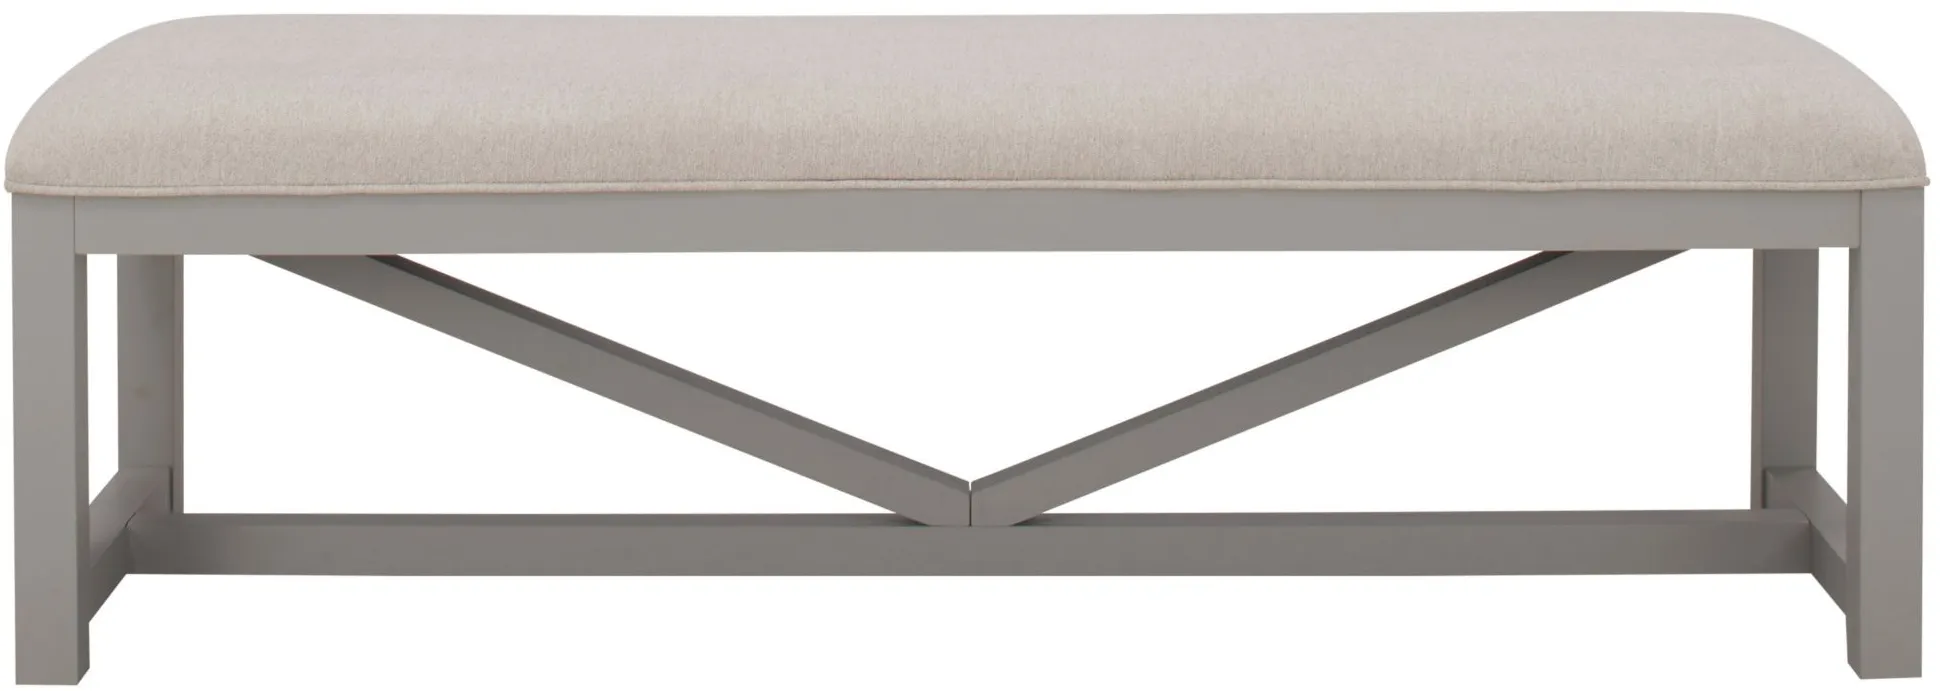 Crew Bench in Gray Skies by Riverside Furniture